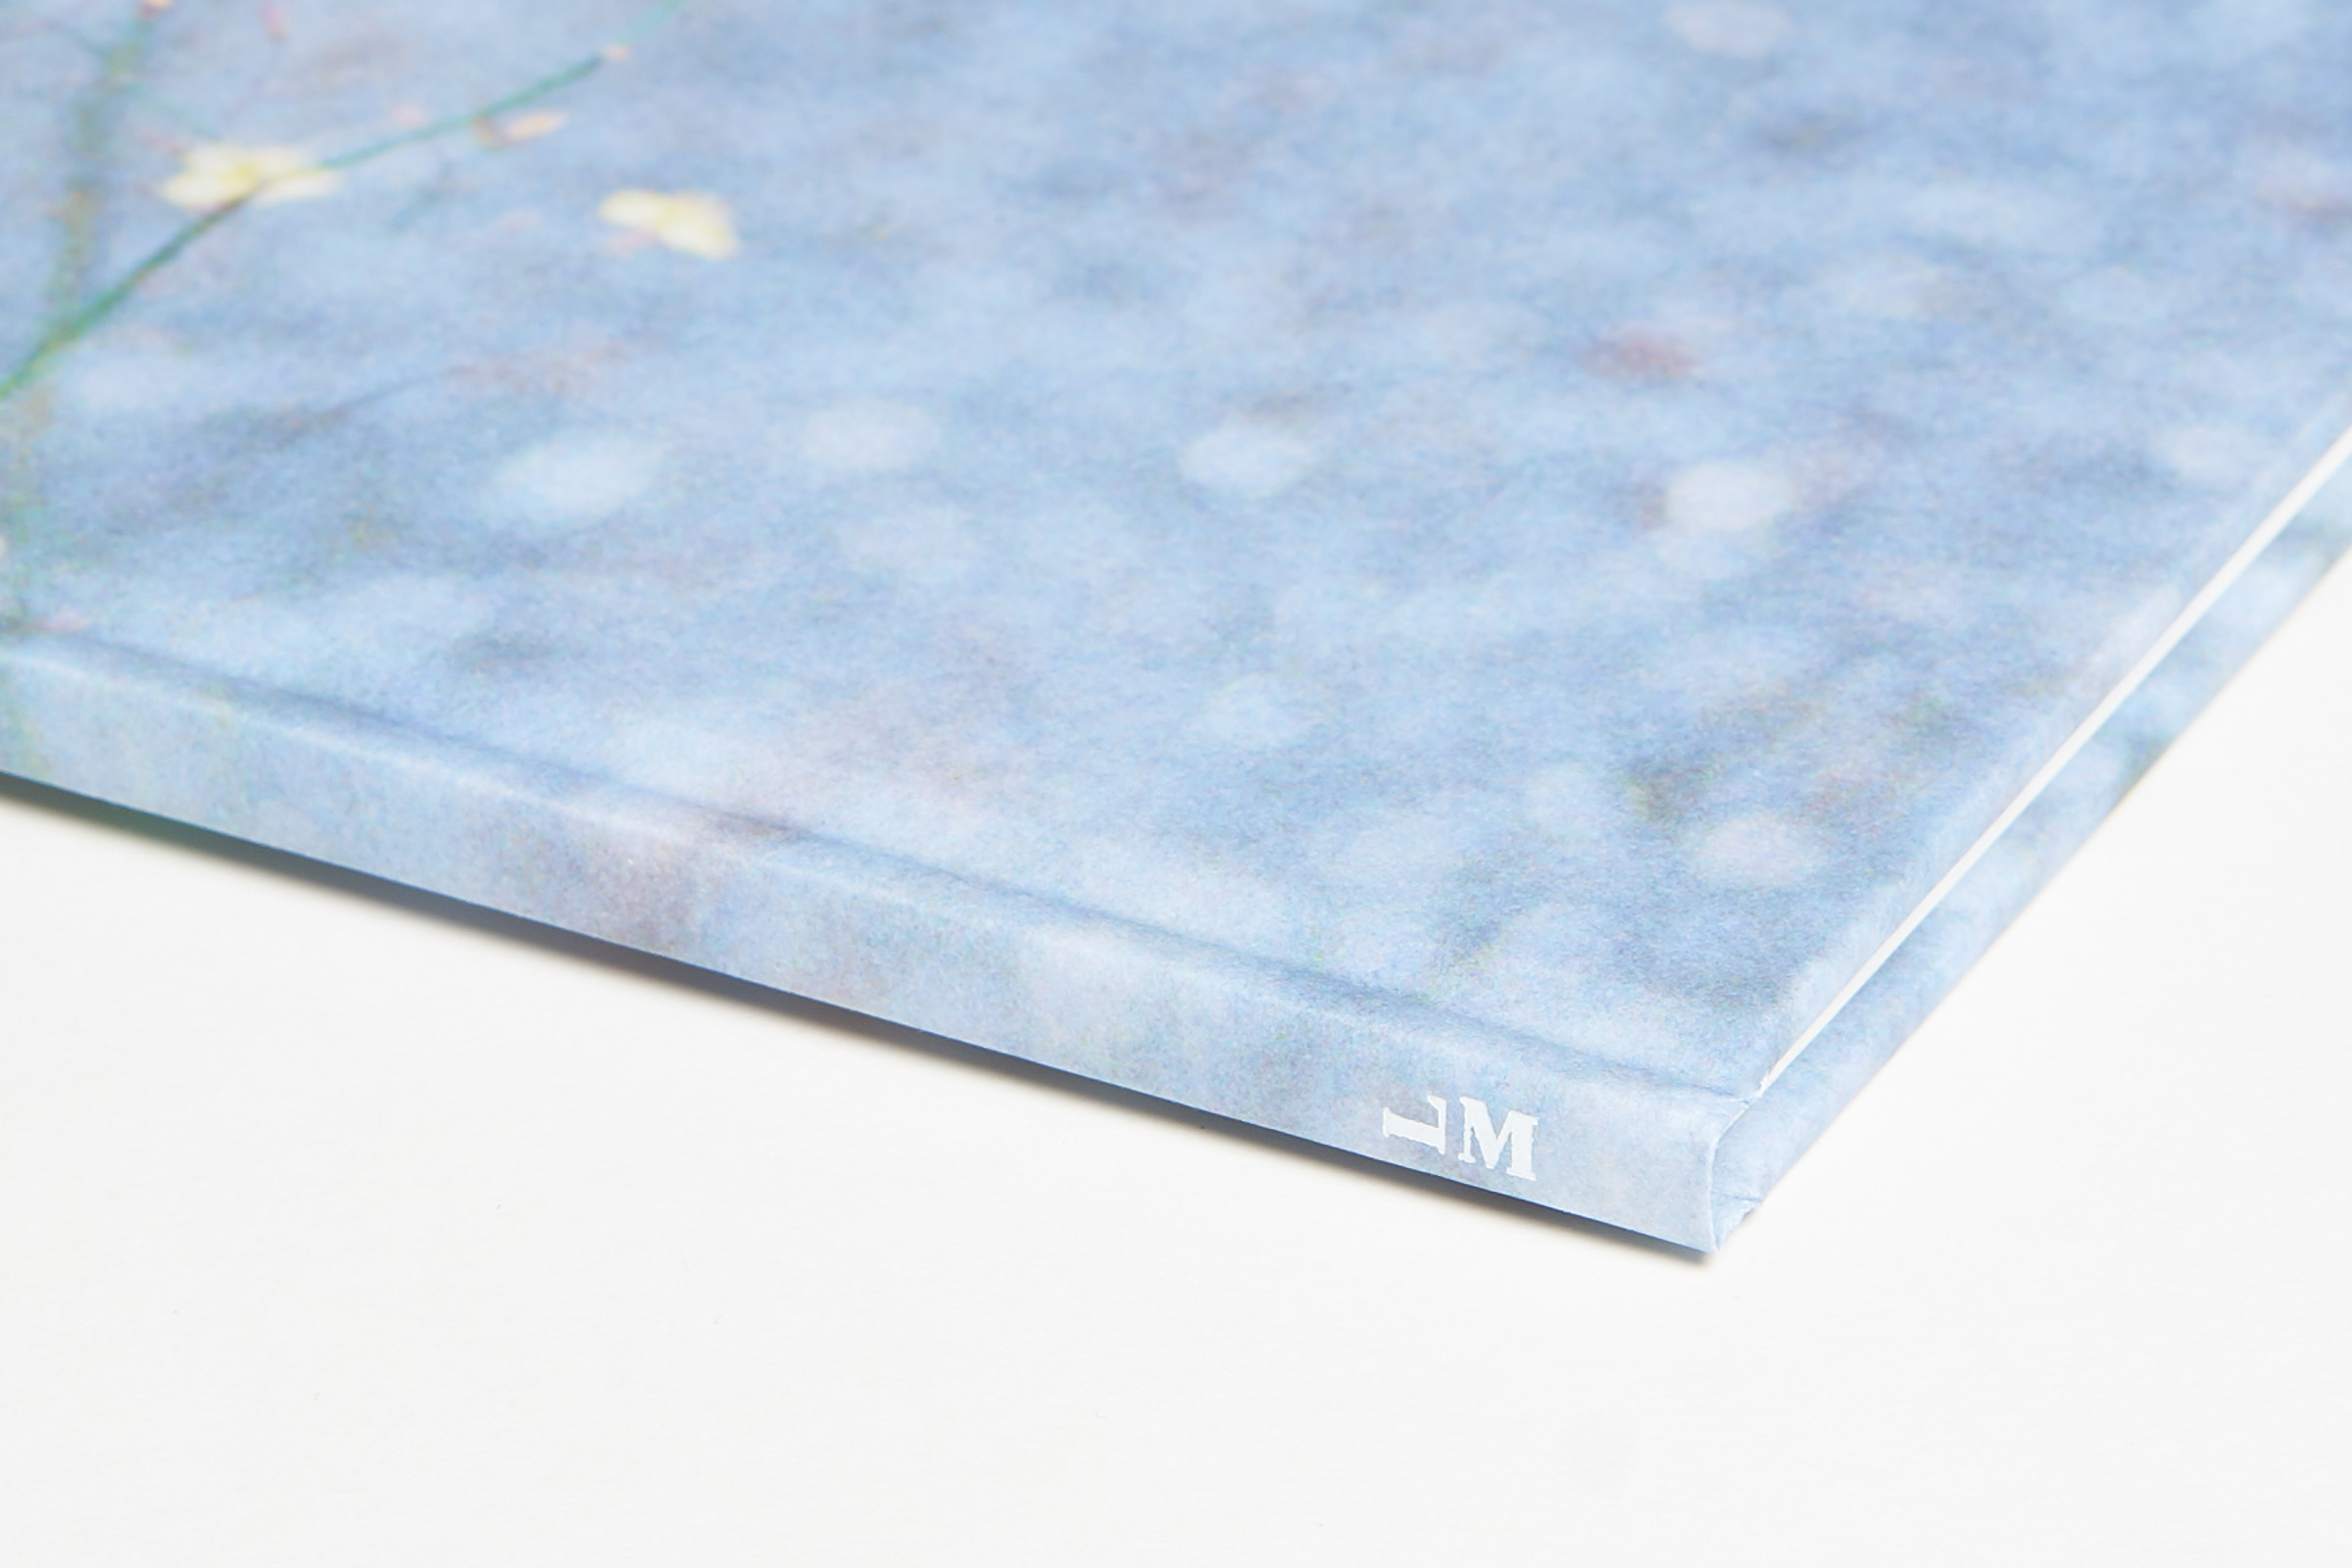 Ola Rindal — Notes on Ordinary Spaces — Book